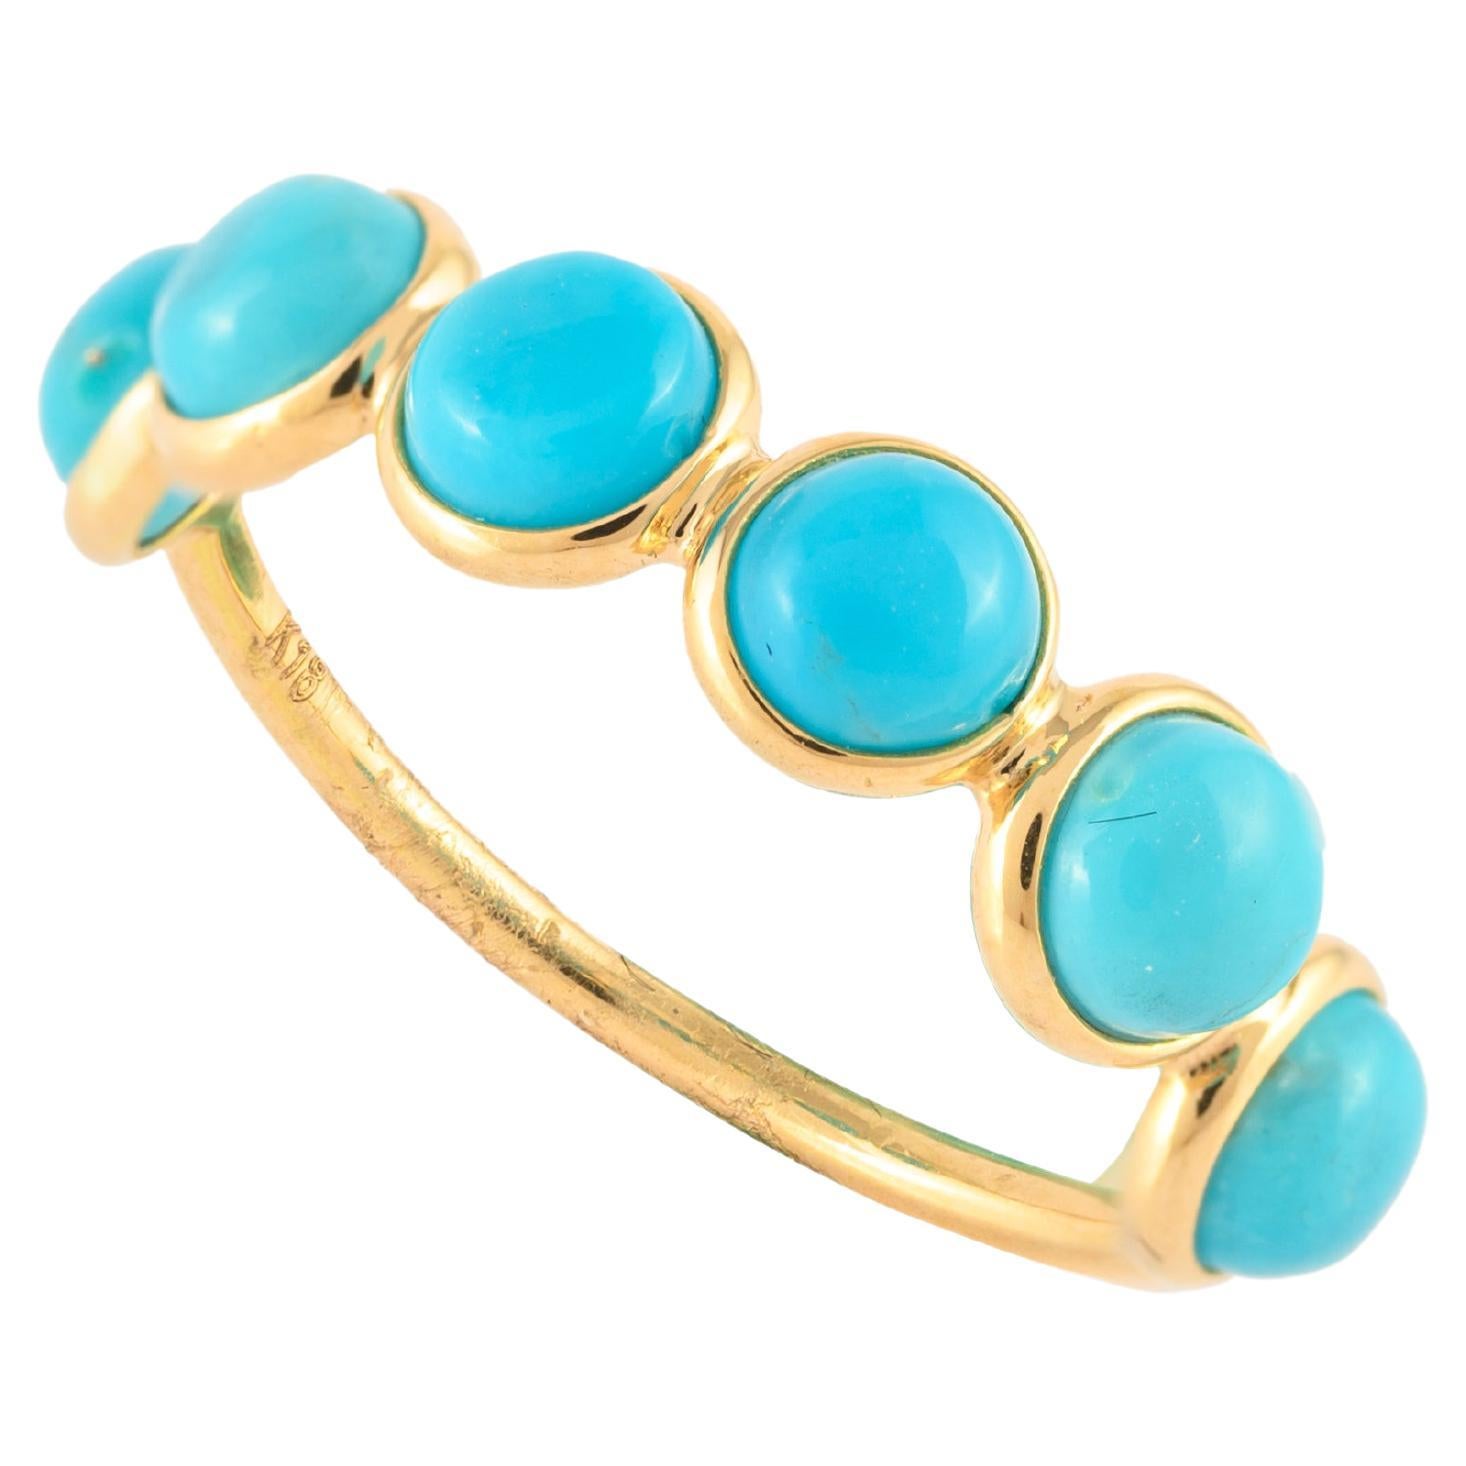 For Sale:  18k Solid Yellow Gold Round Turquoise Half Eternity Band Ring